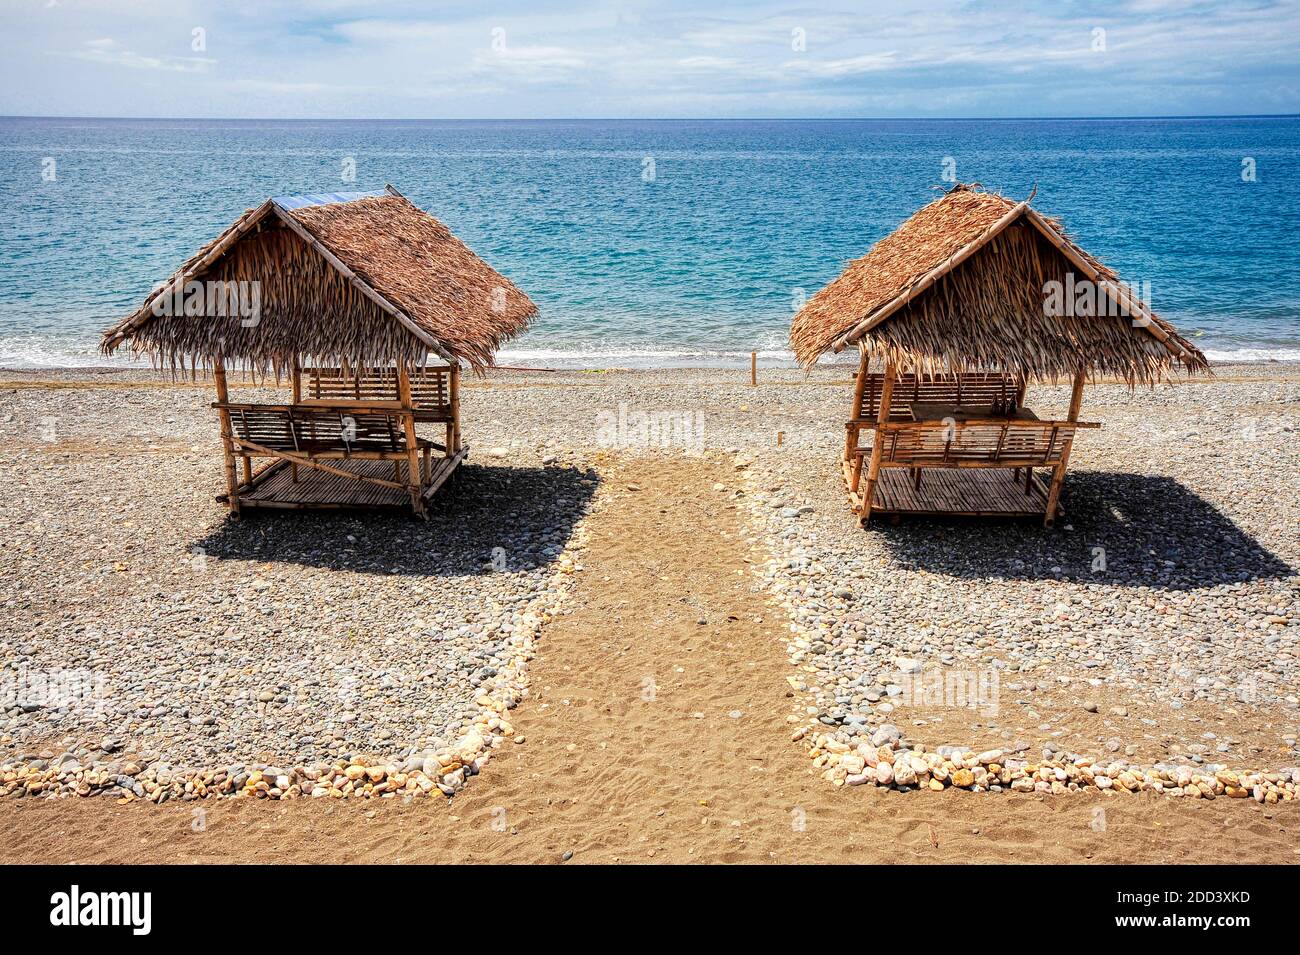 Two bamboo beach huts with nippa roof on a clean empty beach against a blue sea in La Paz, Antique Province, Visayas Islands, Philippines, Asia Stock Photo